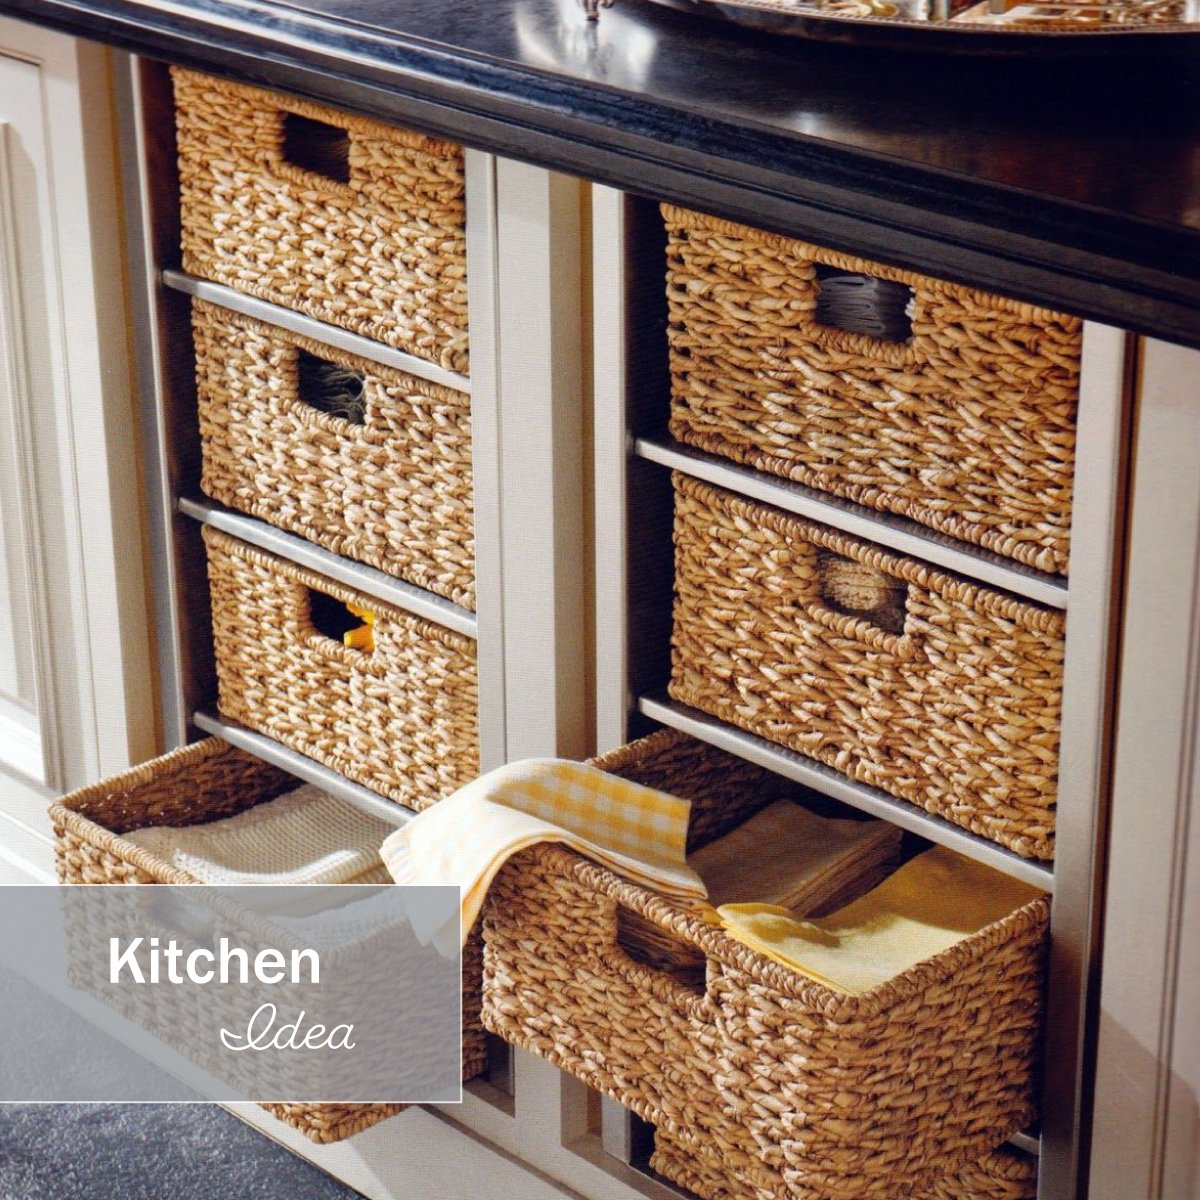 Instead of having drawers in your kitchen, add in sliding wicker baskets, a unique and natural looking asset that's a little bit different 🙌 Not just helpful for storage, but for looking good too! 😊